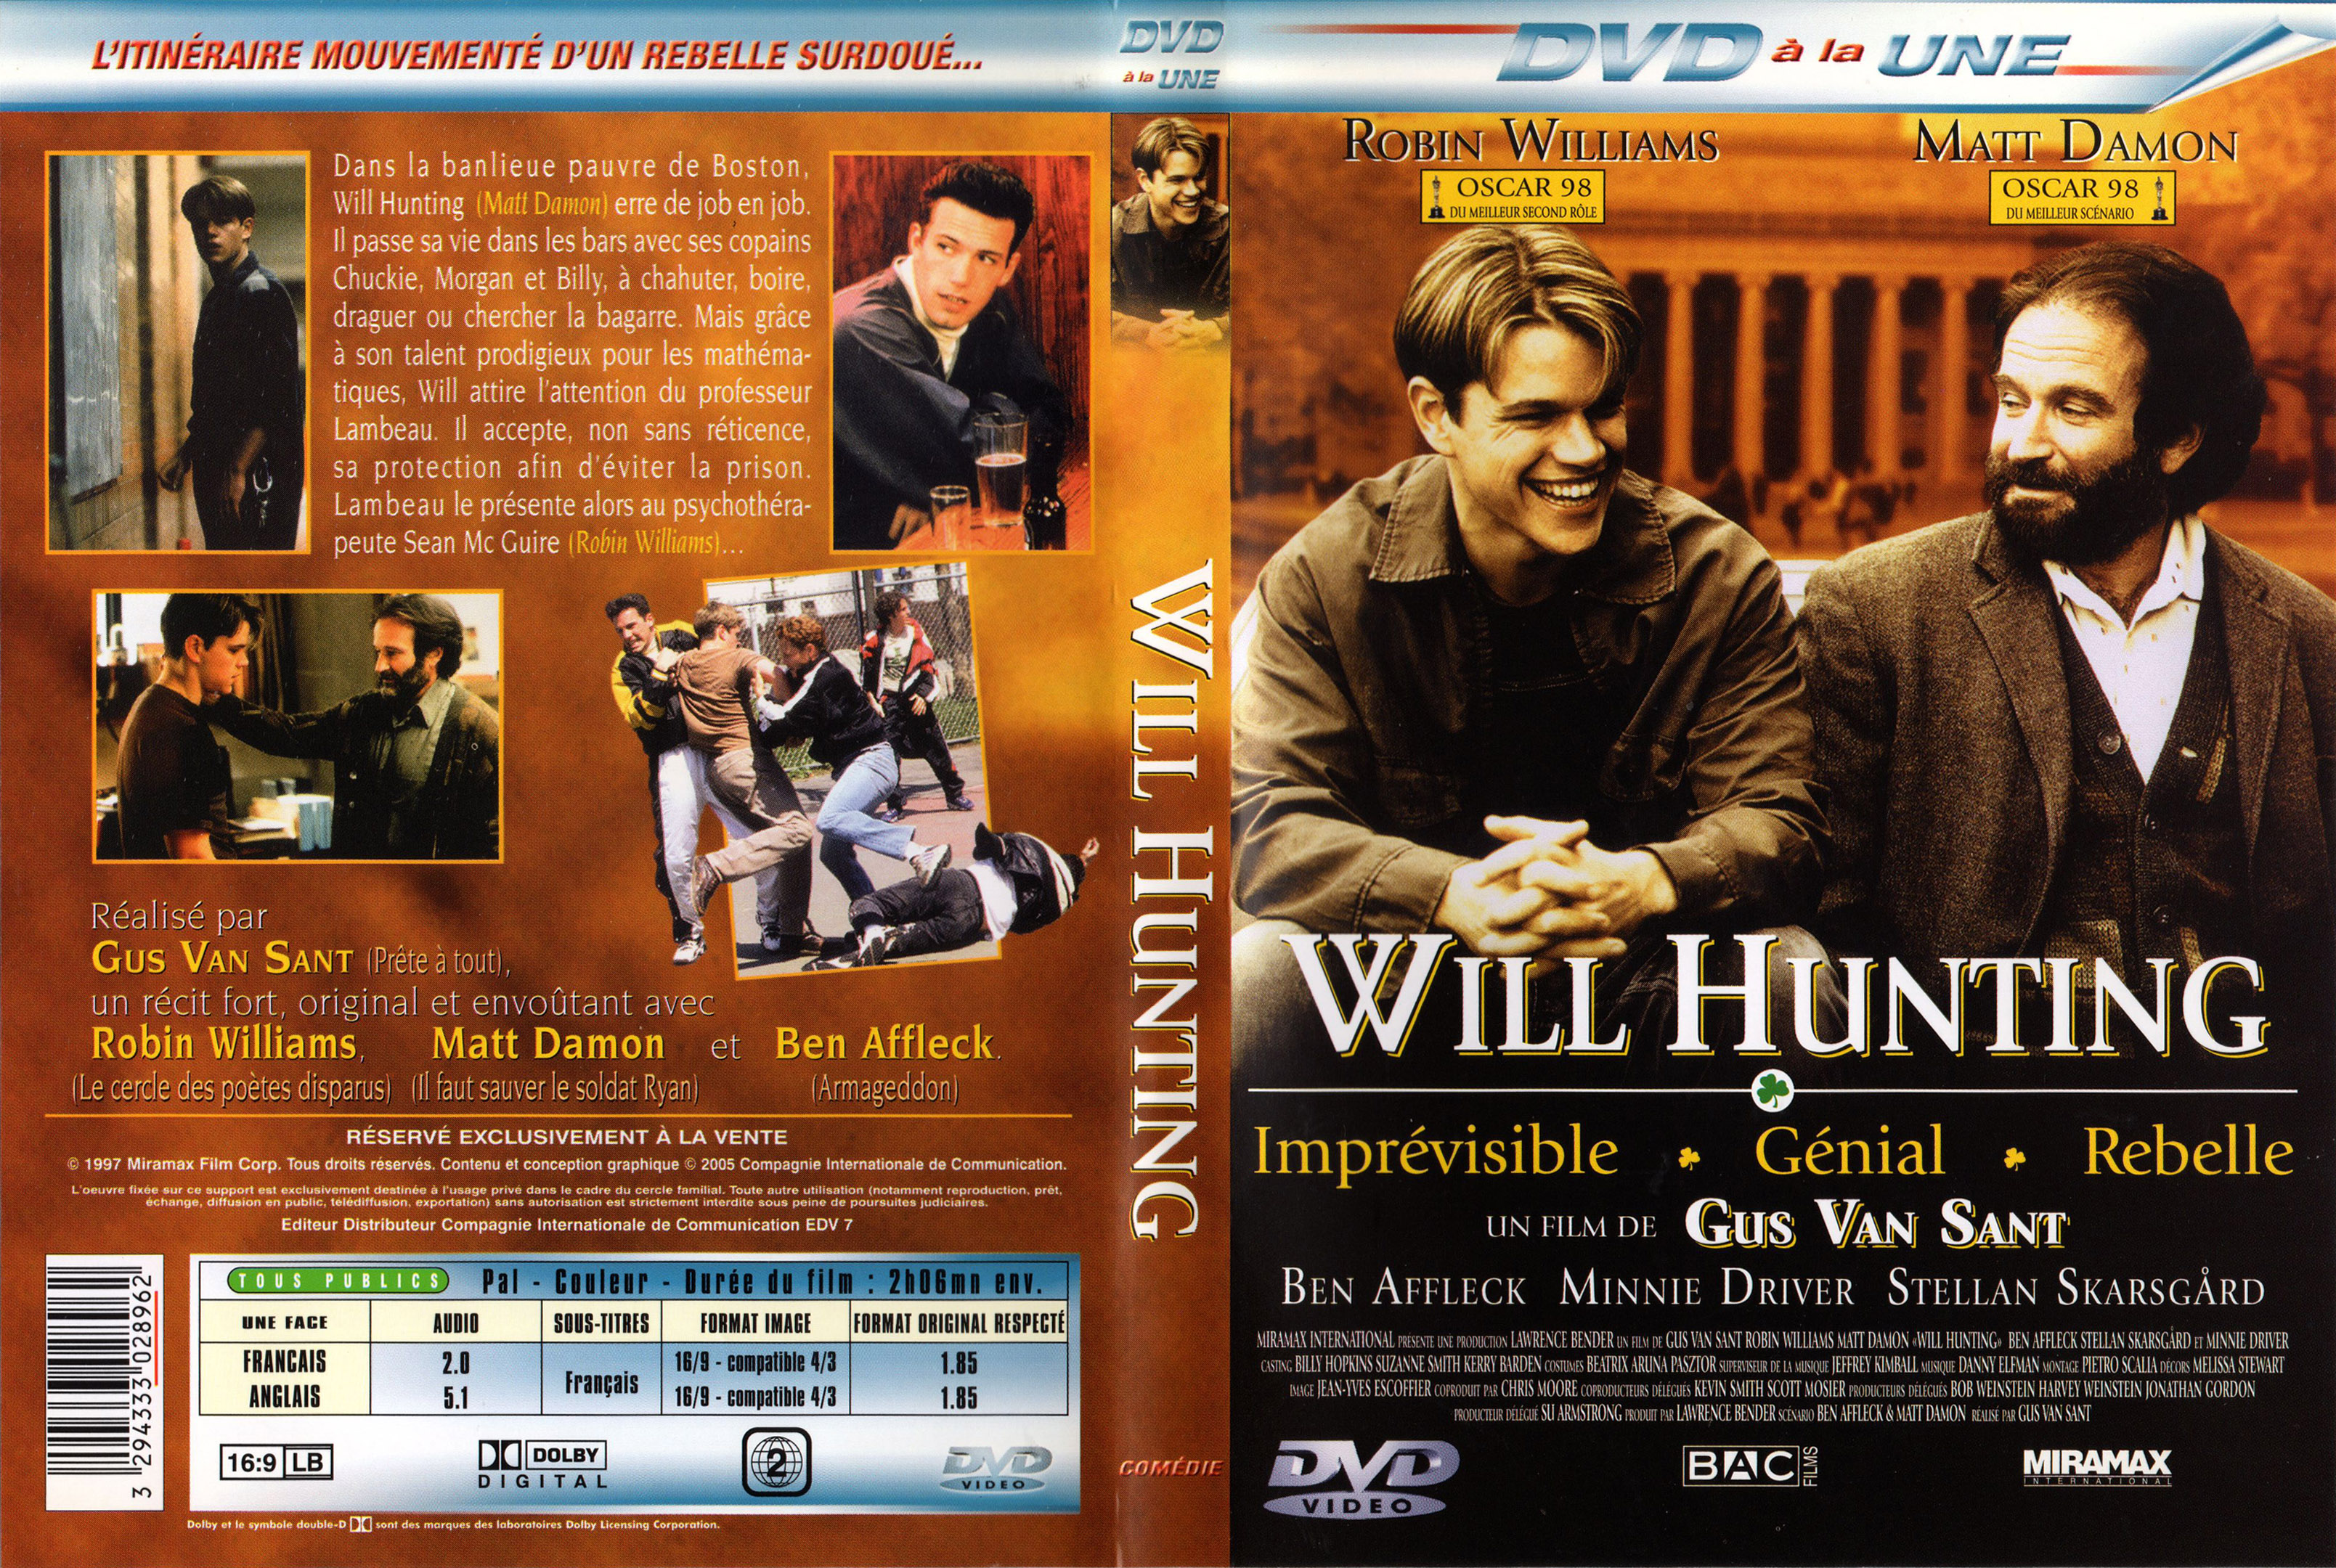 Jaquette DVD Will Hunting v3